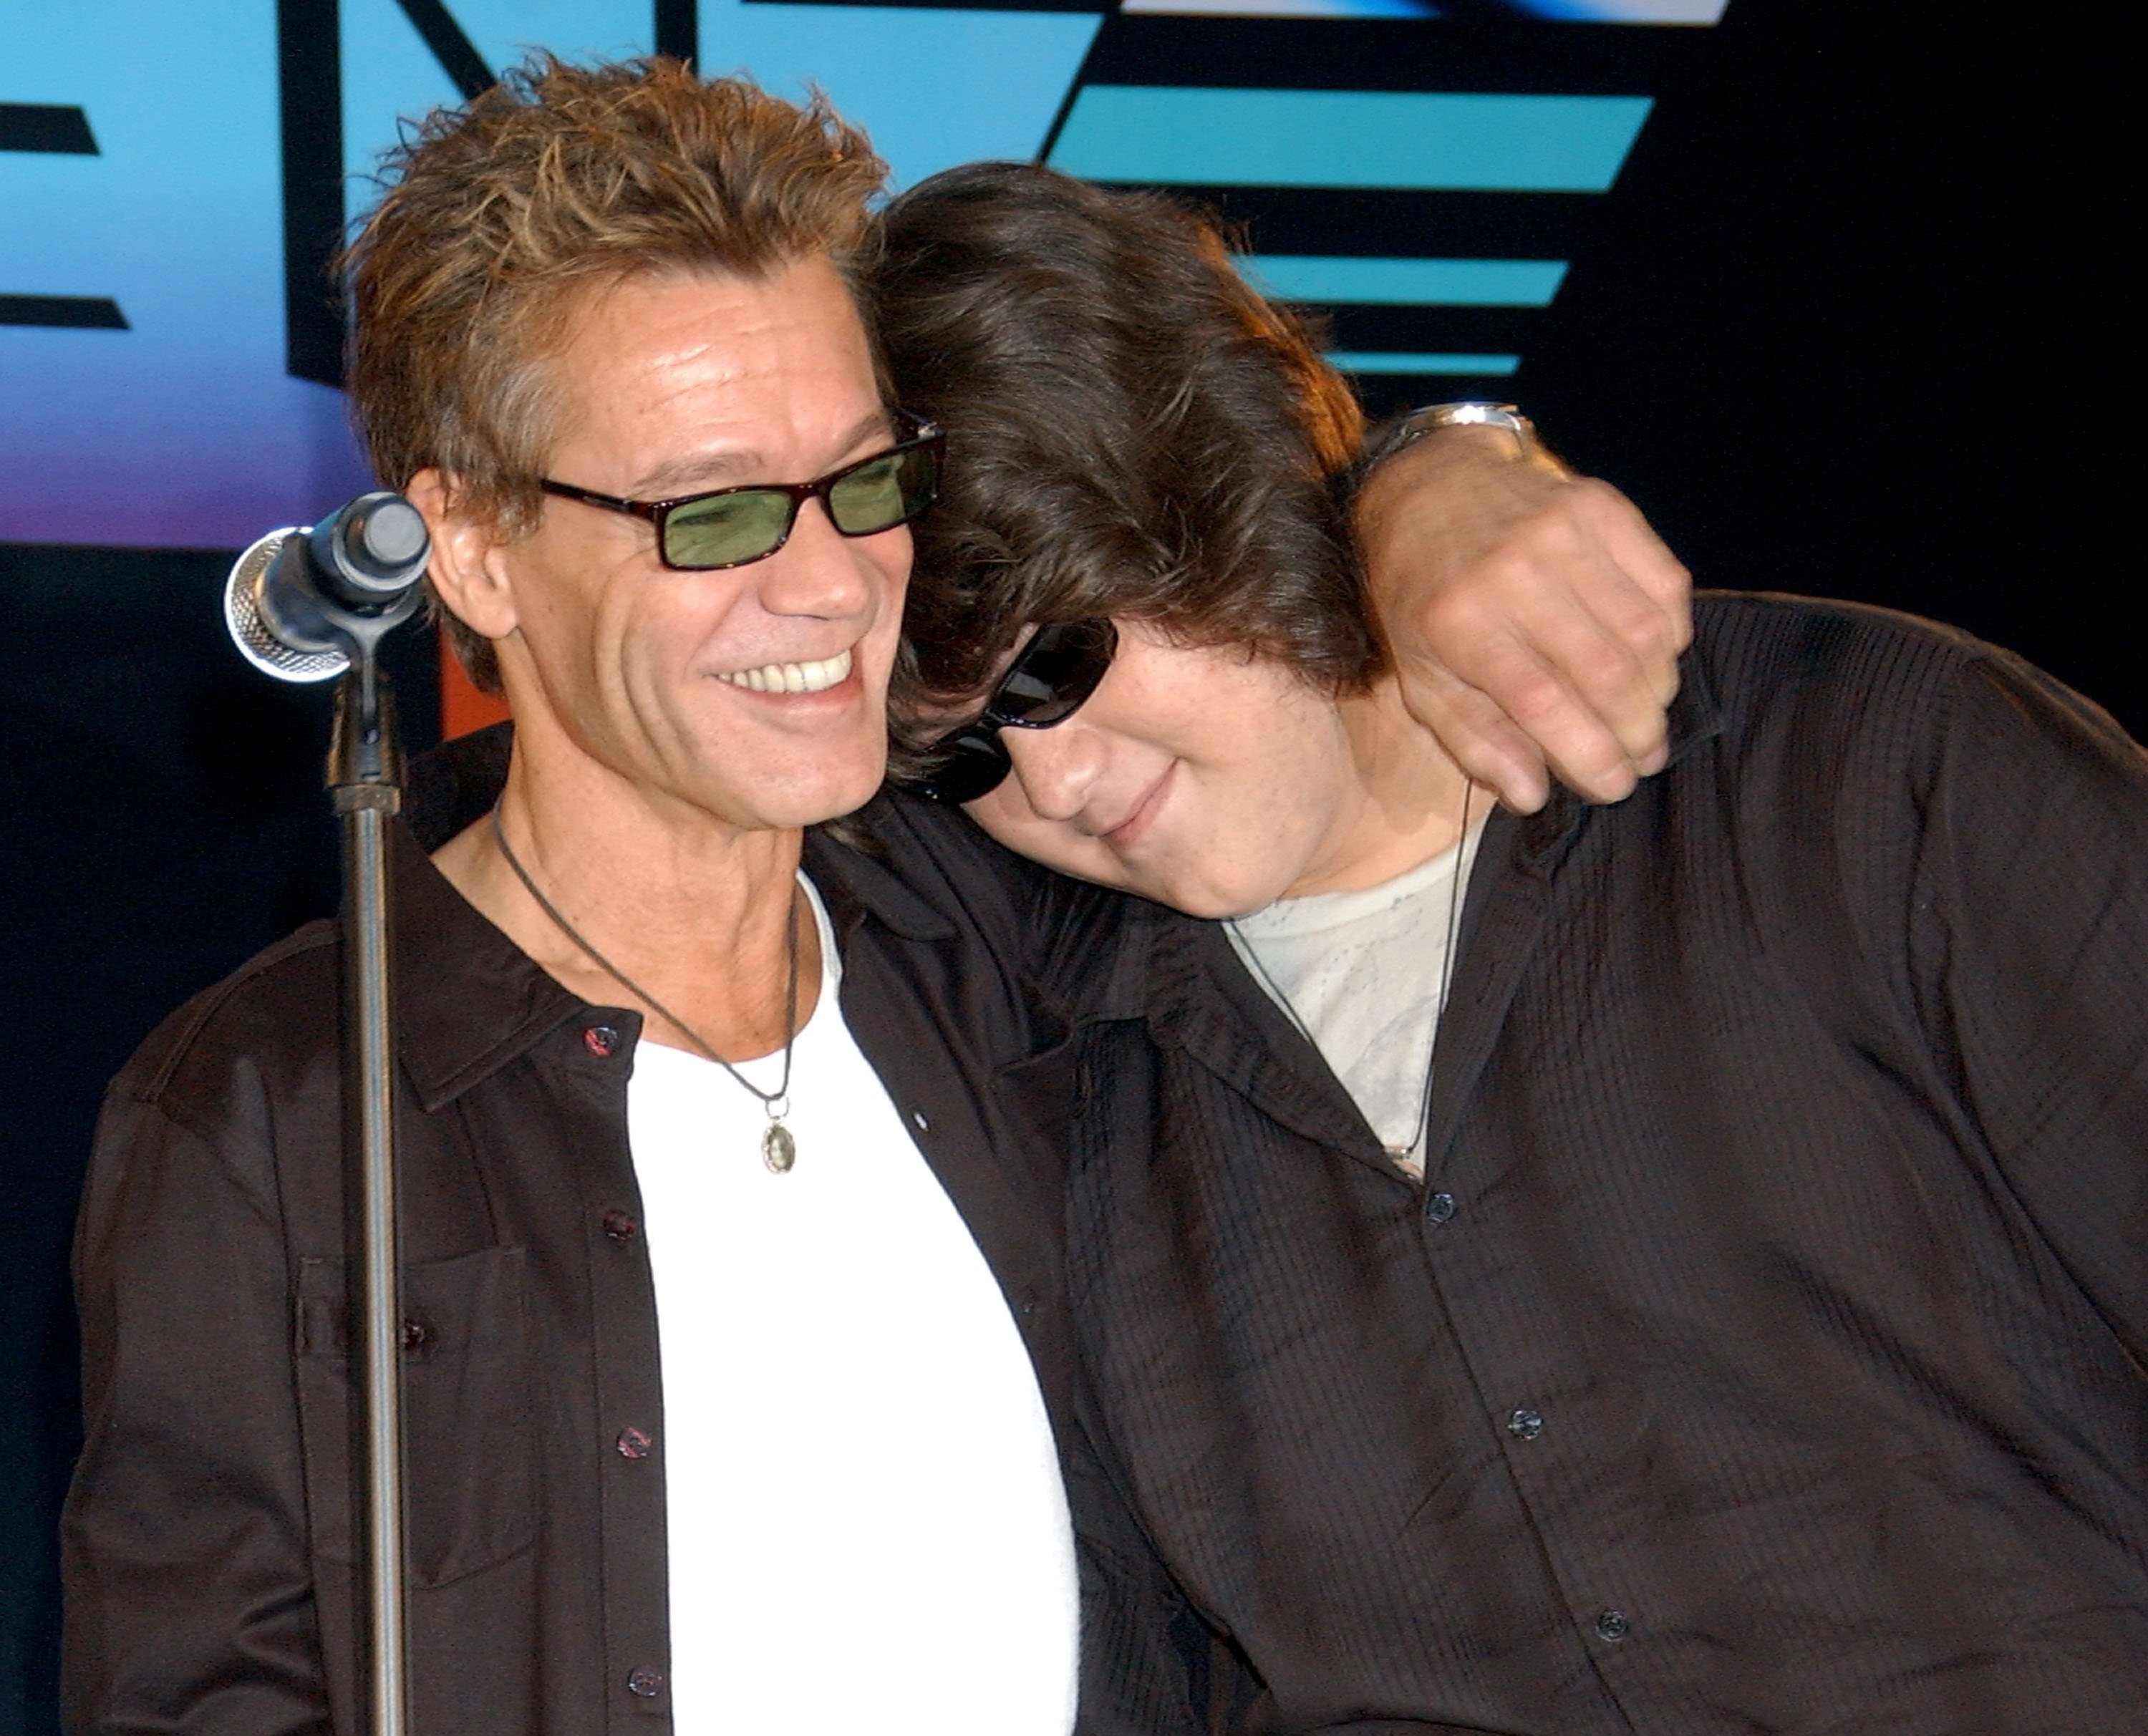 Eddie Van Halen and Wolfgang Van Halen at the Van Halen and David Lee Roth press conference announcing their North American tour at the Four Seasons Hotel on August 13, 2007, in Los Angeles, California. | Source: Getty Images